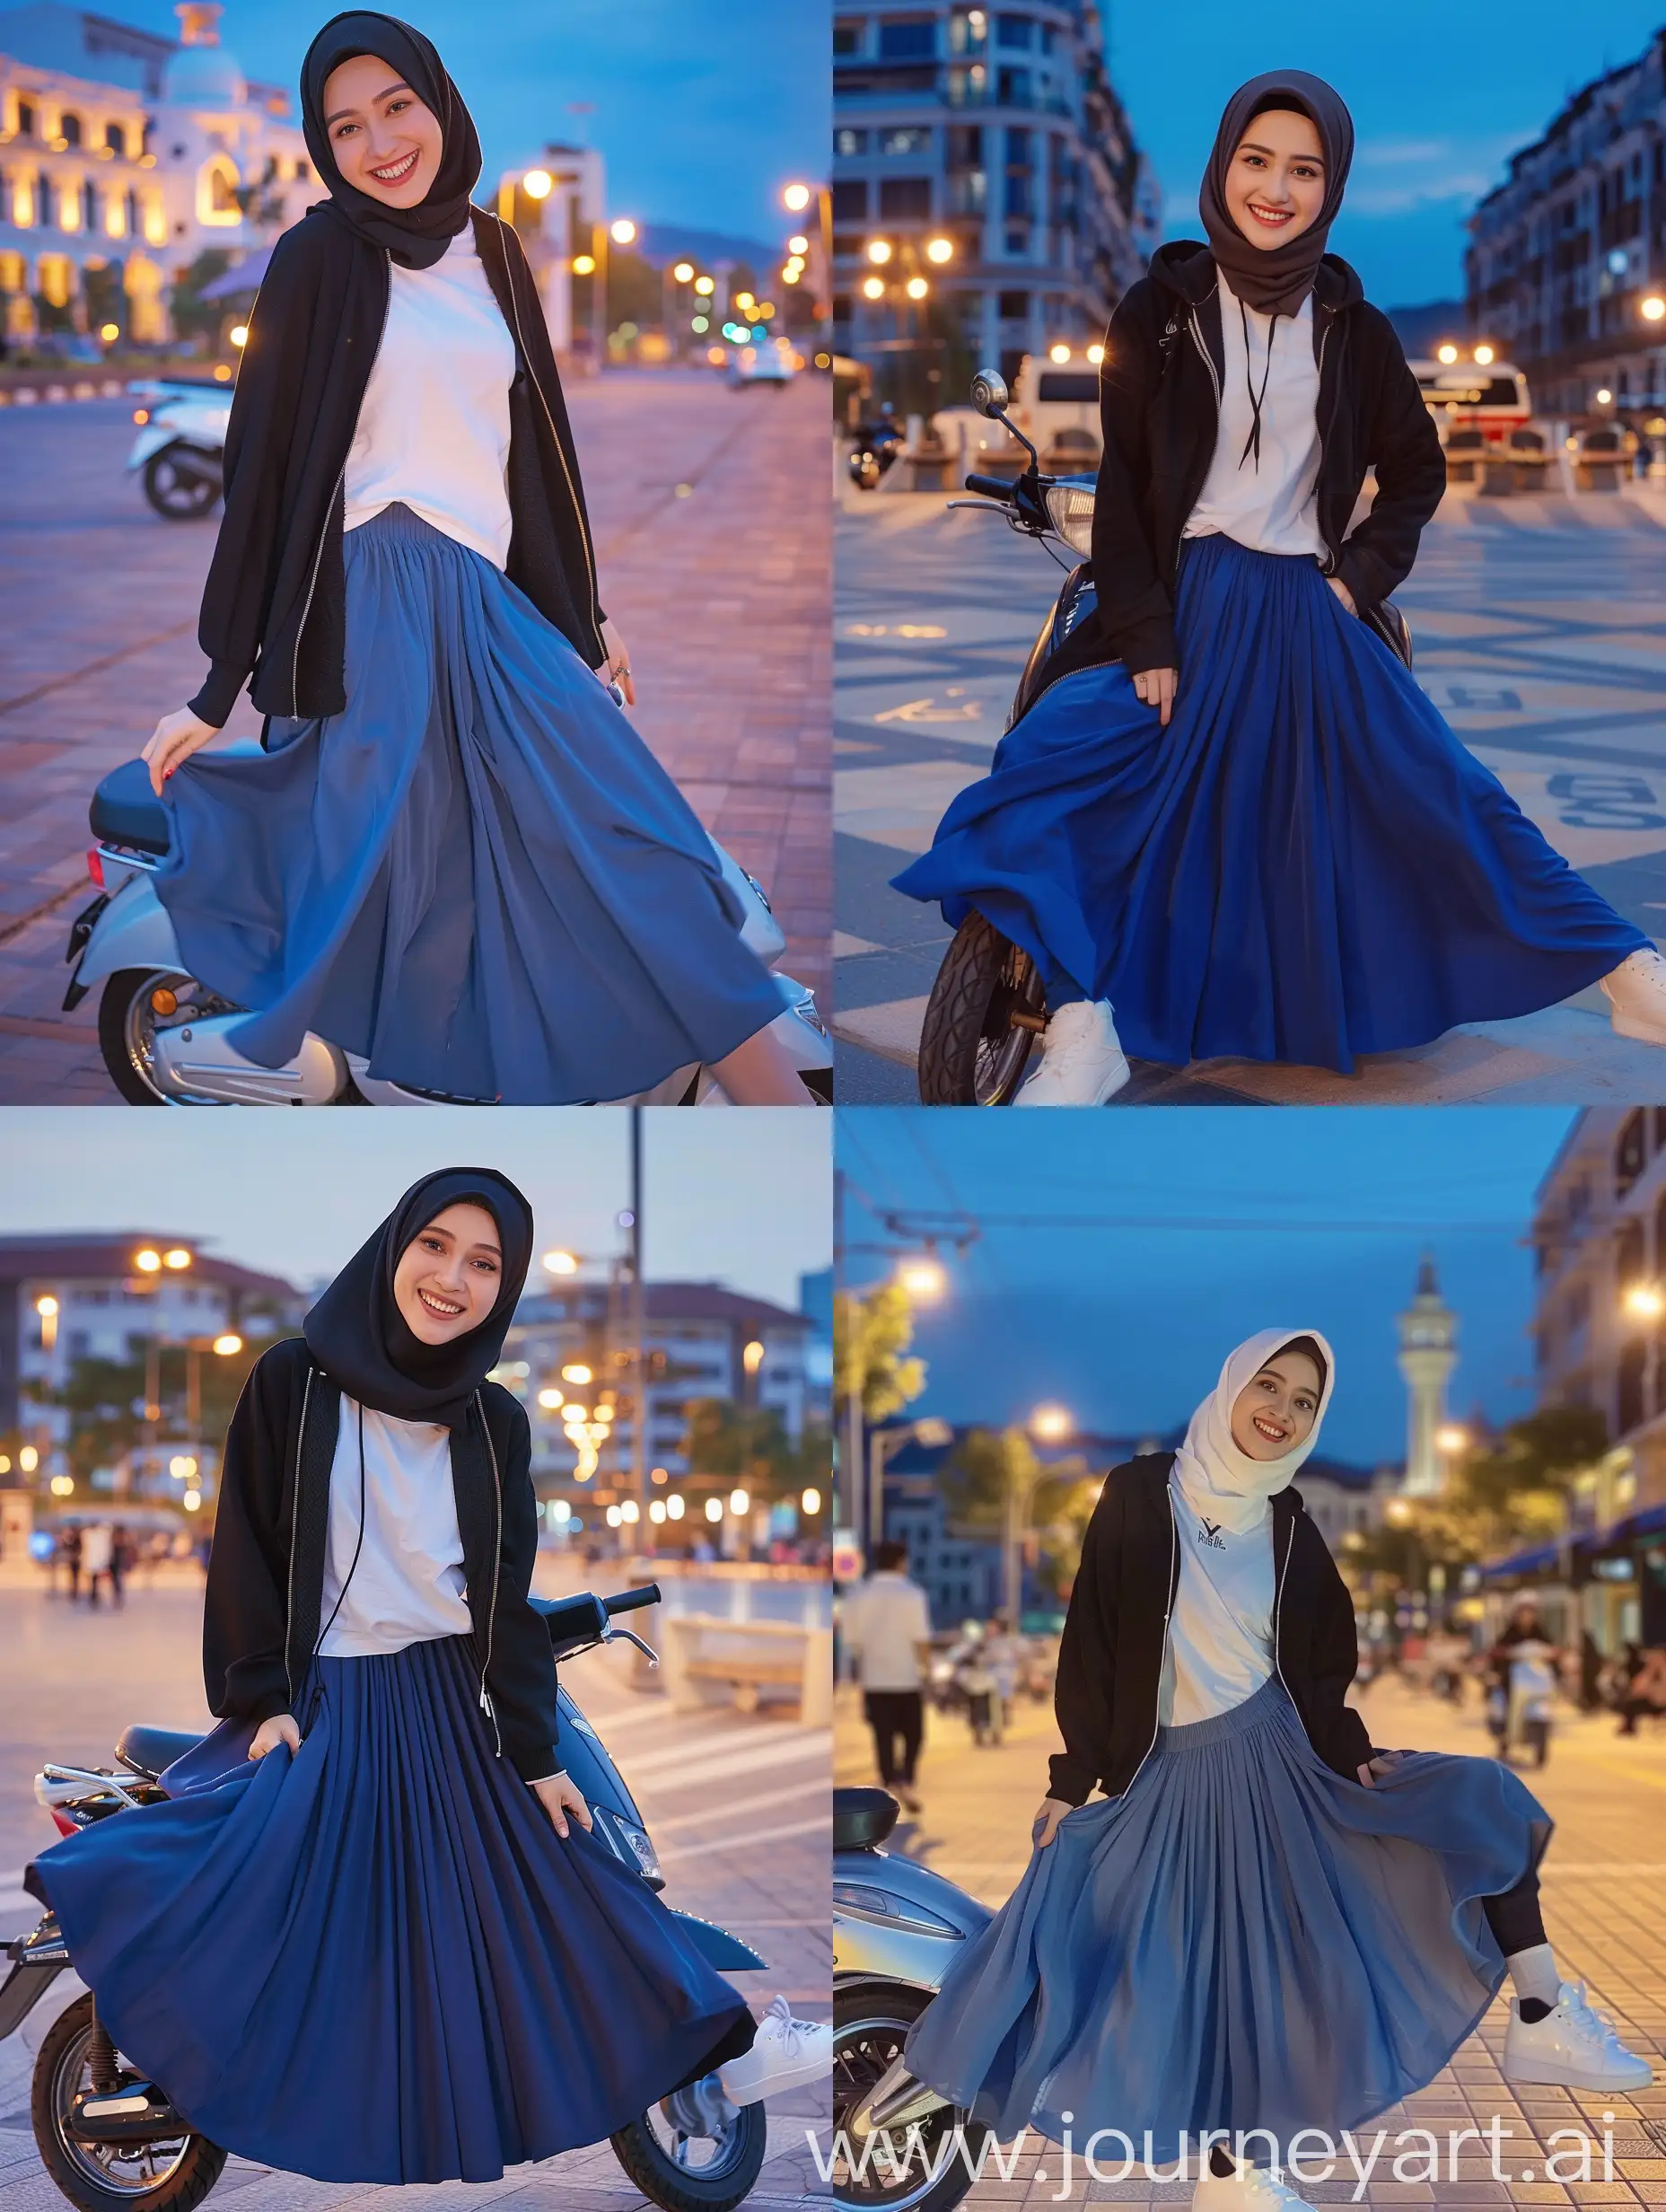 Indonesian-Woman-in-Hijab-Smiling-on-Scooter-in-City-Square